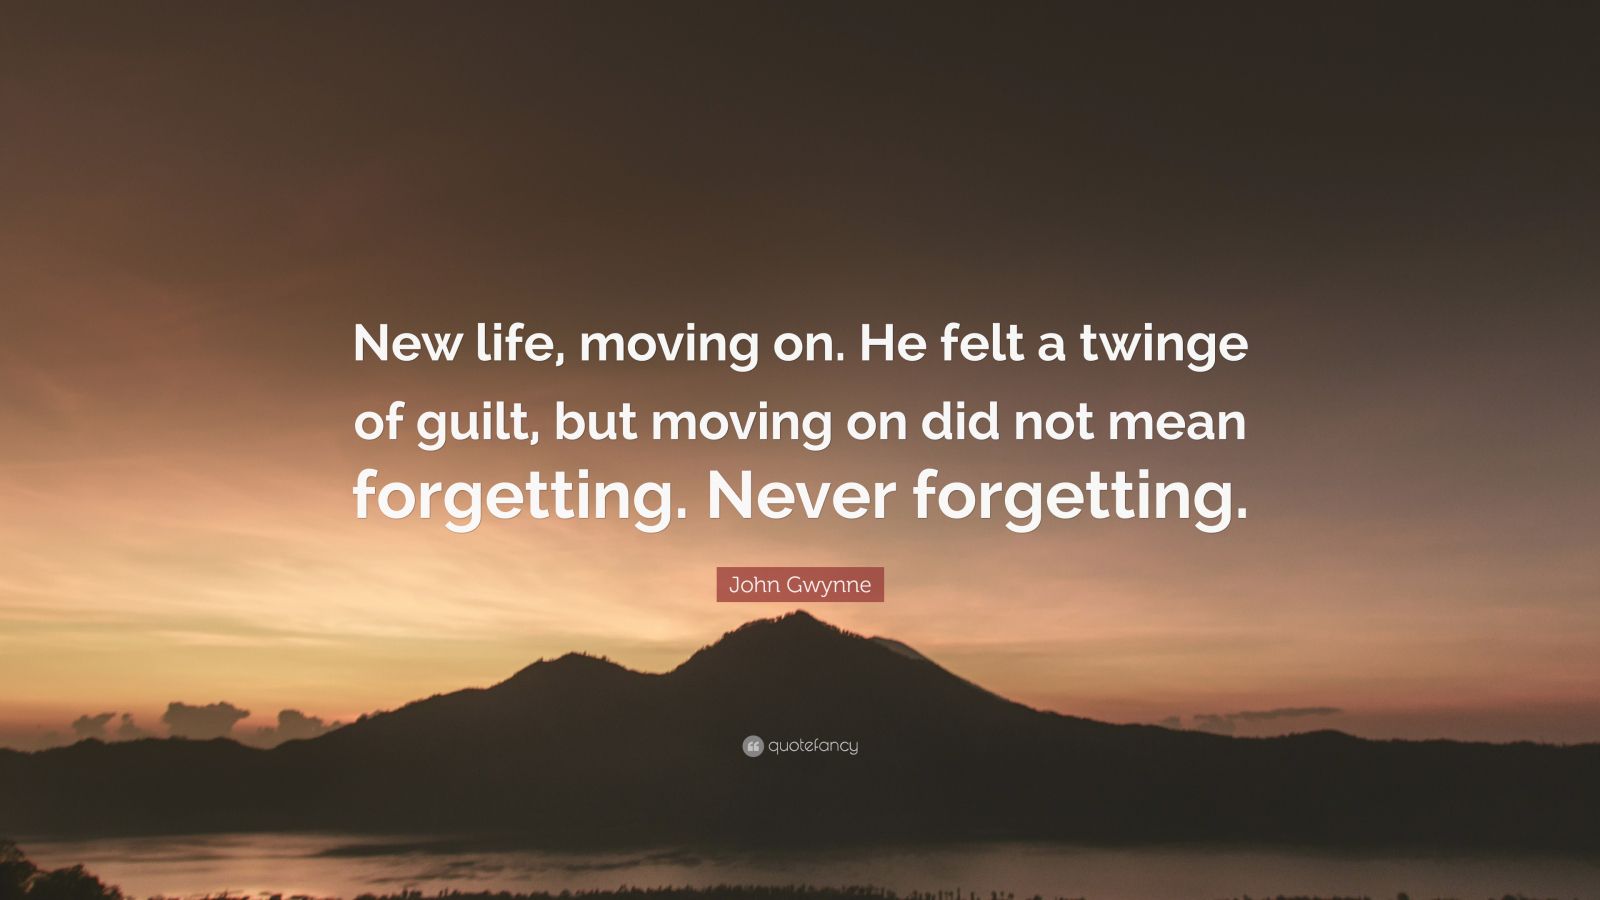 8058516 John Gwynne Quote New Life Moving On He Felt A Twinge Of Guilt But Moving On Did Not 